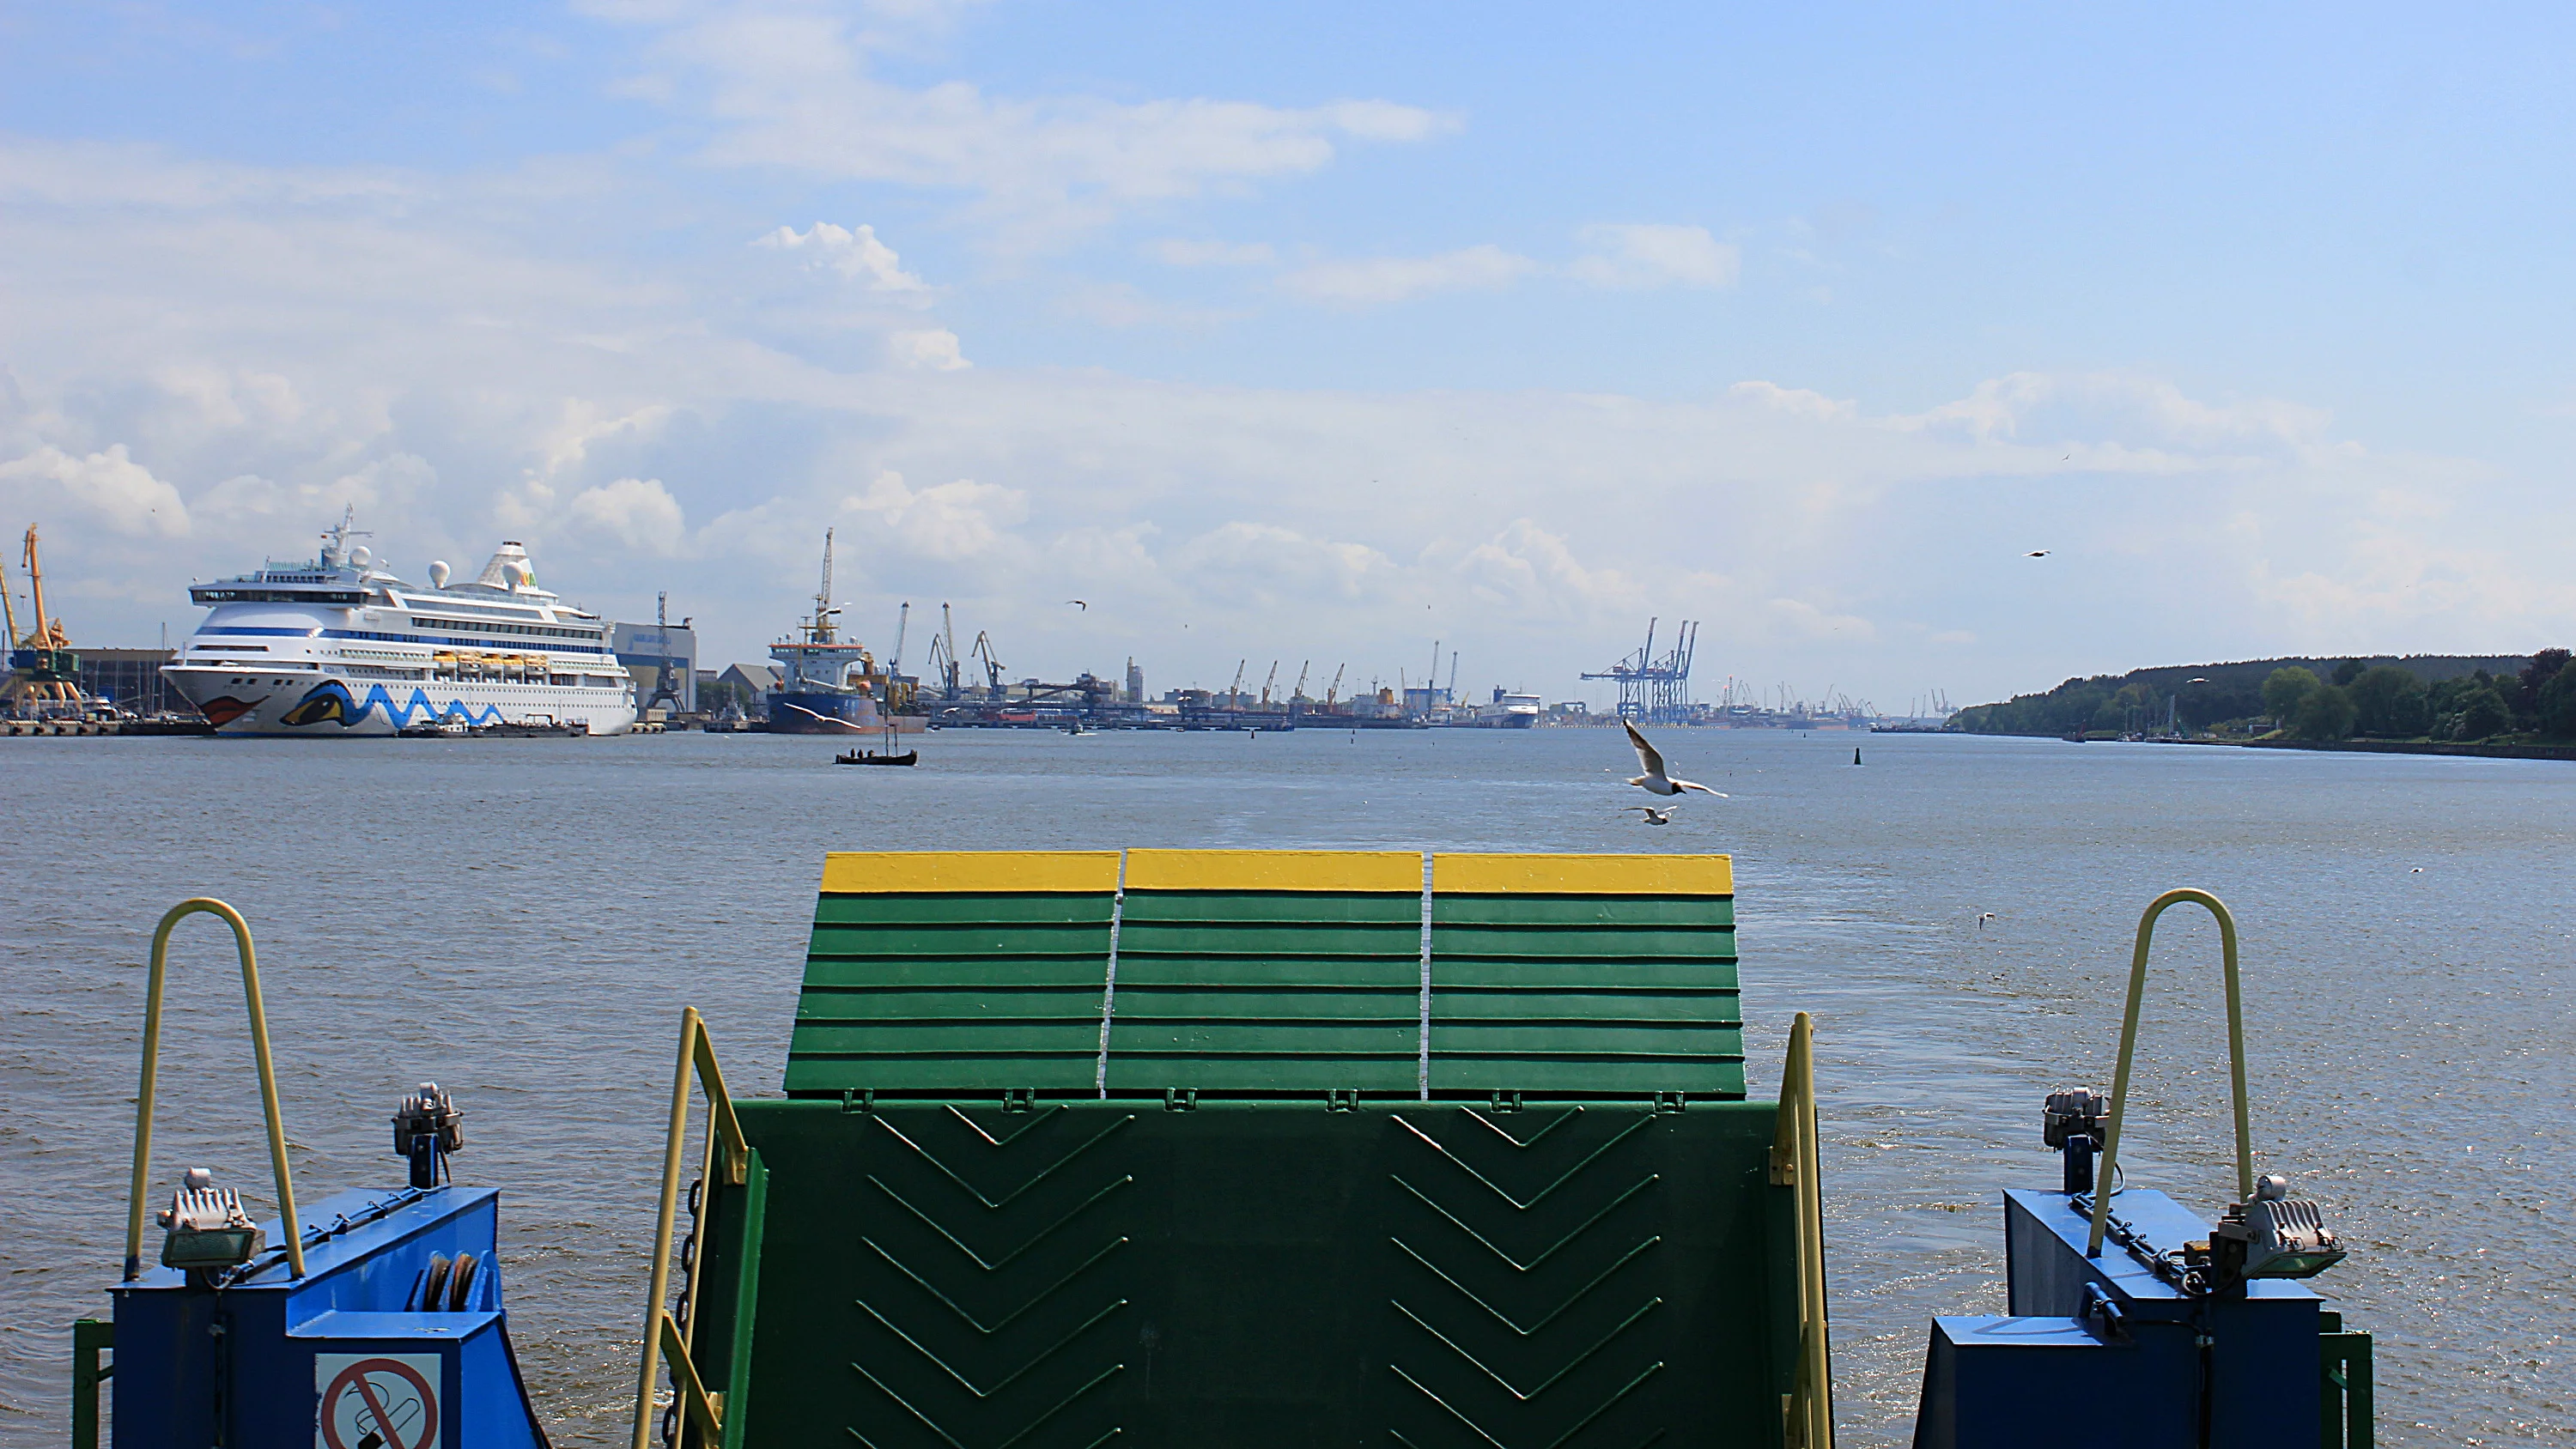 The back of the ferry to Curonian Spit with a green car ramp and a cruise ship in the background.